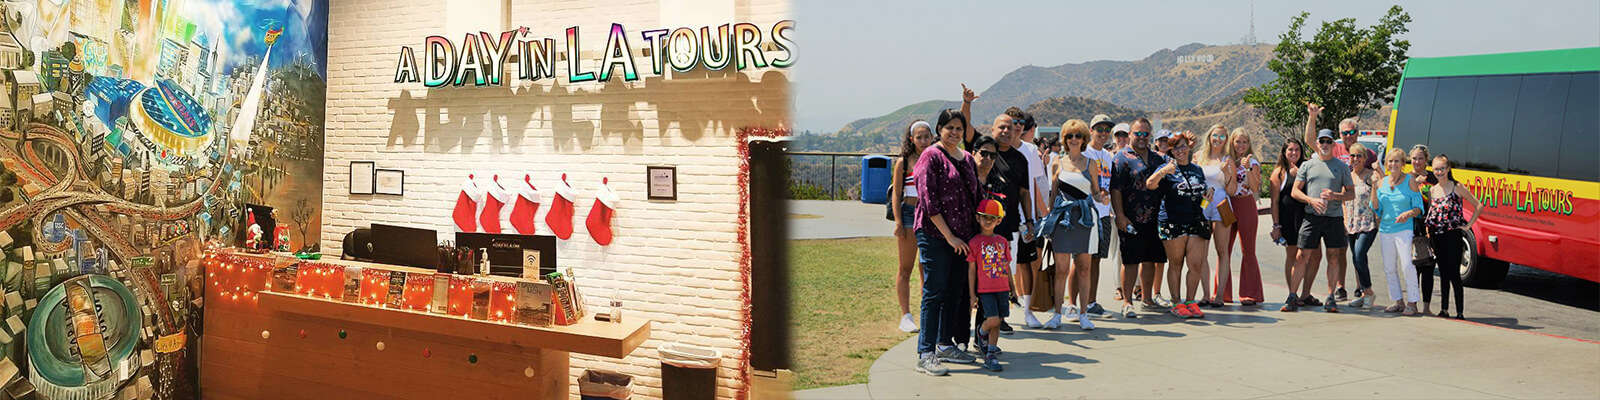 A Day in LA Tours Coupons